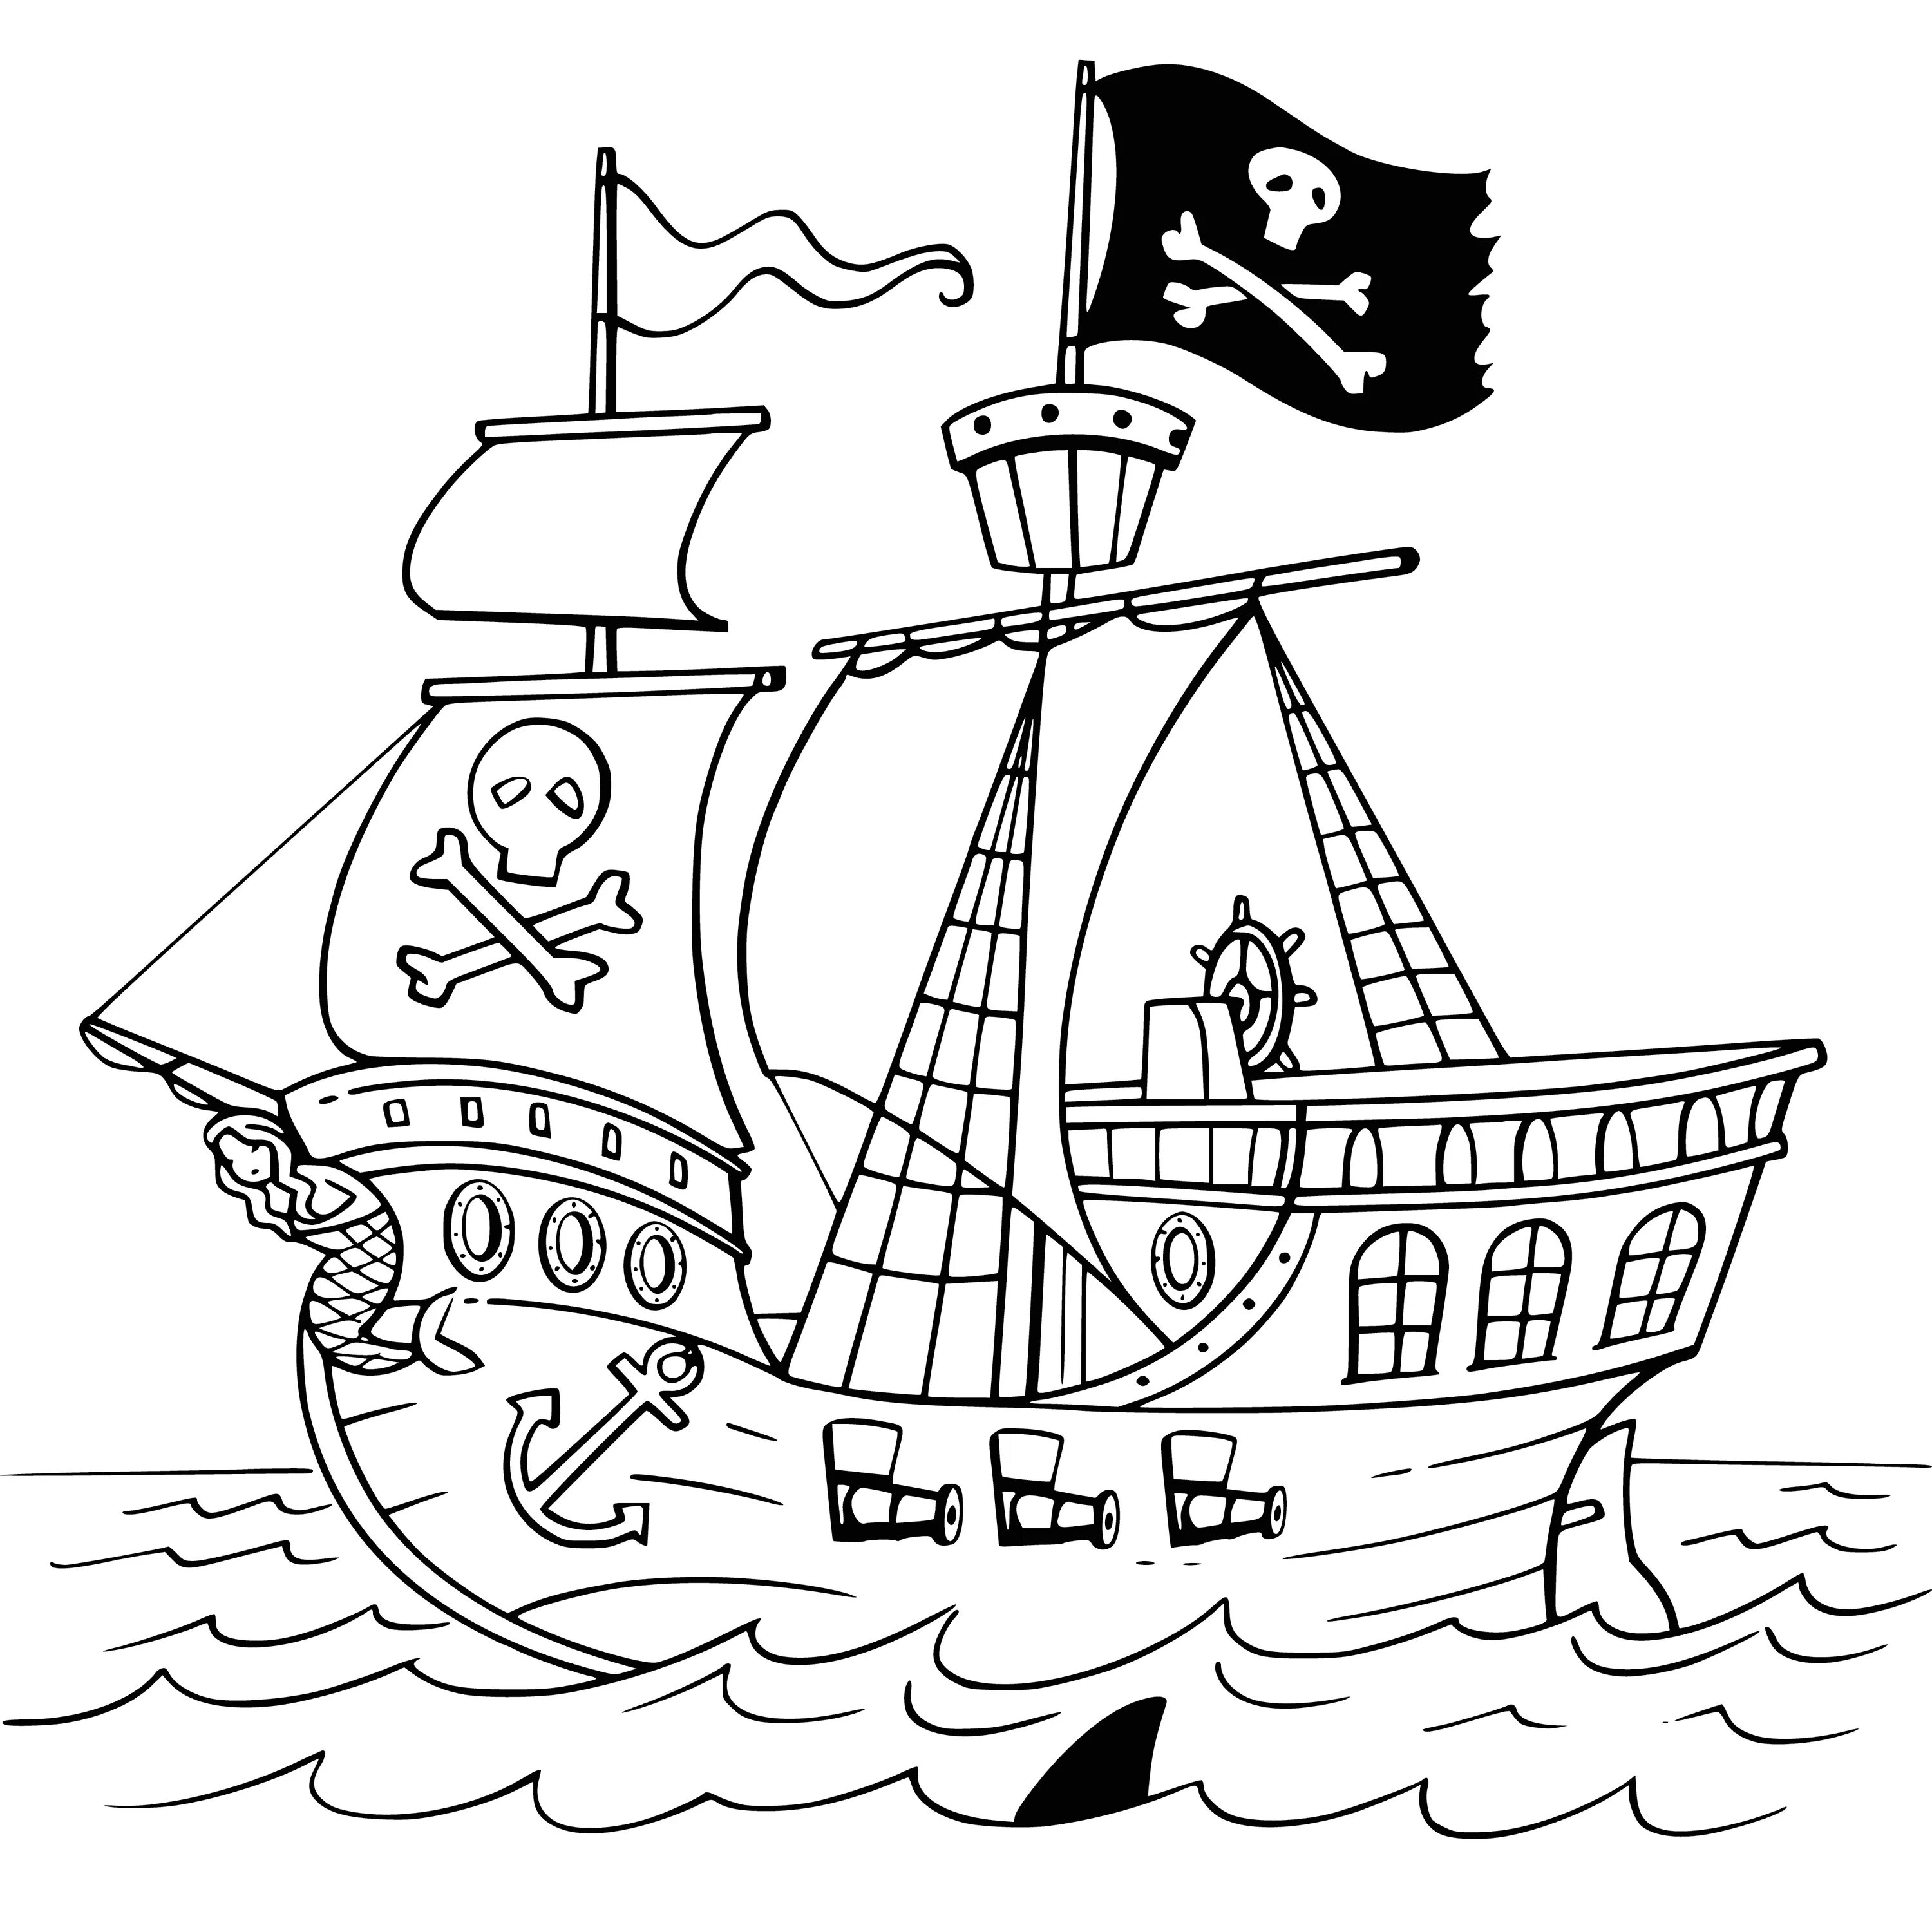 Unique pirate ship coloring page for kids